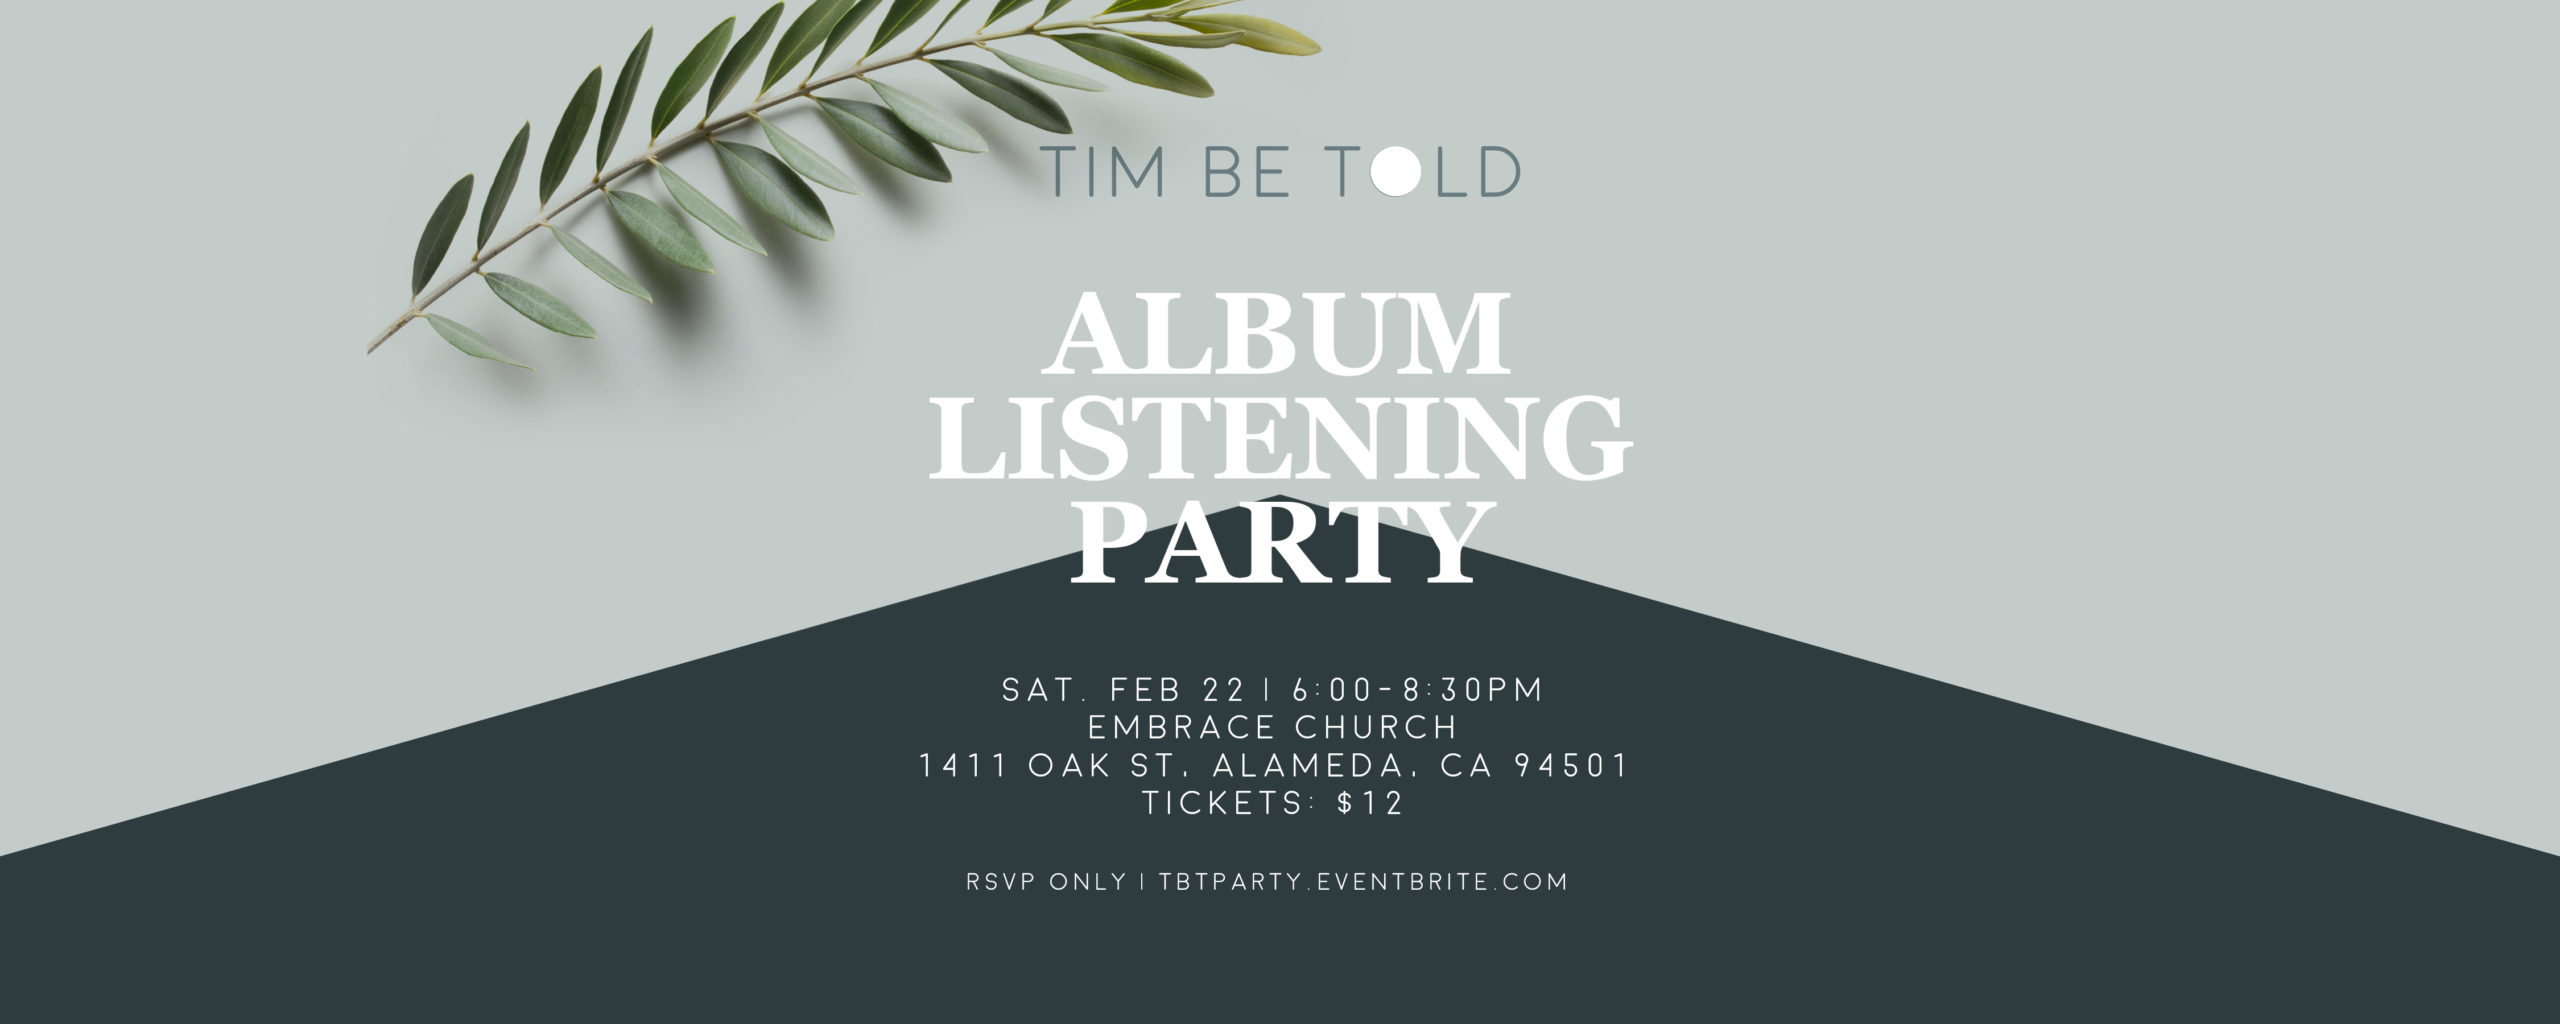 Tim Be Told Album Listening Party